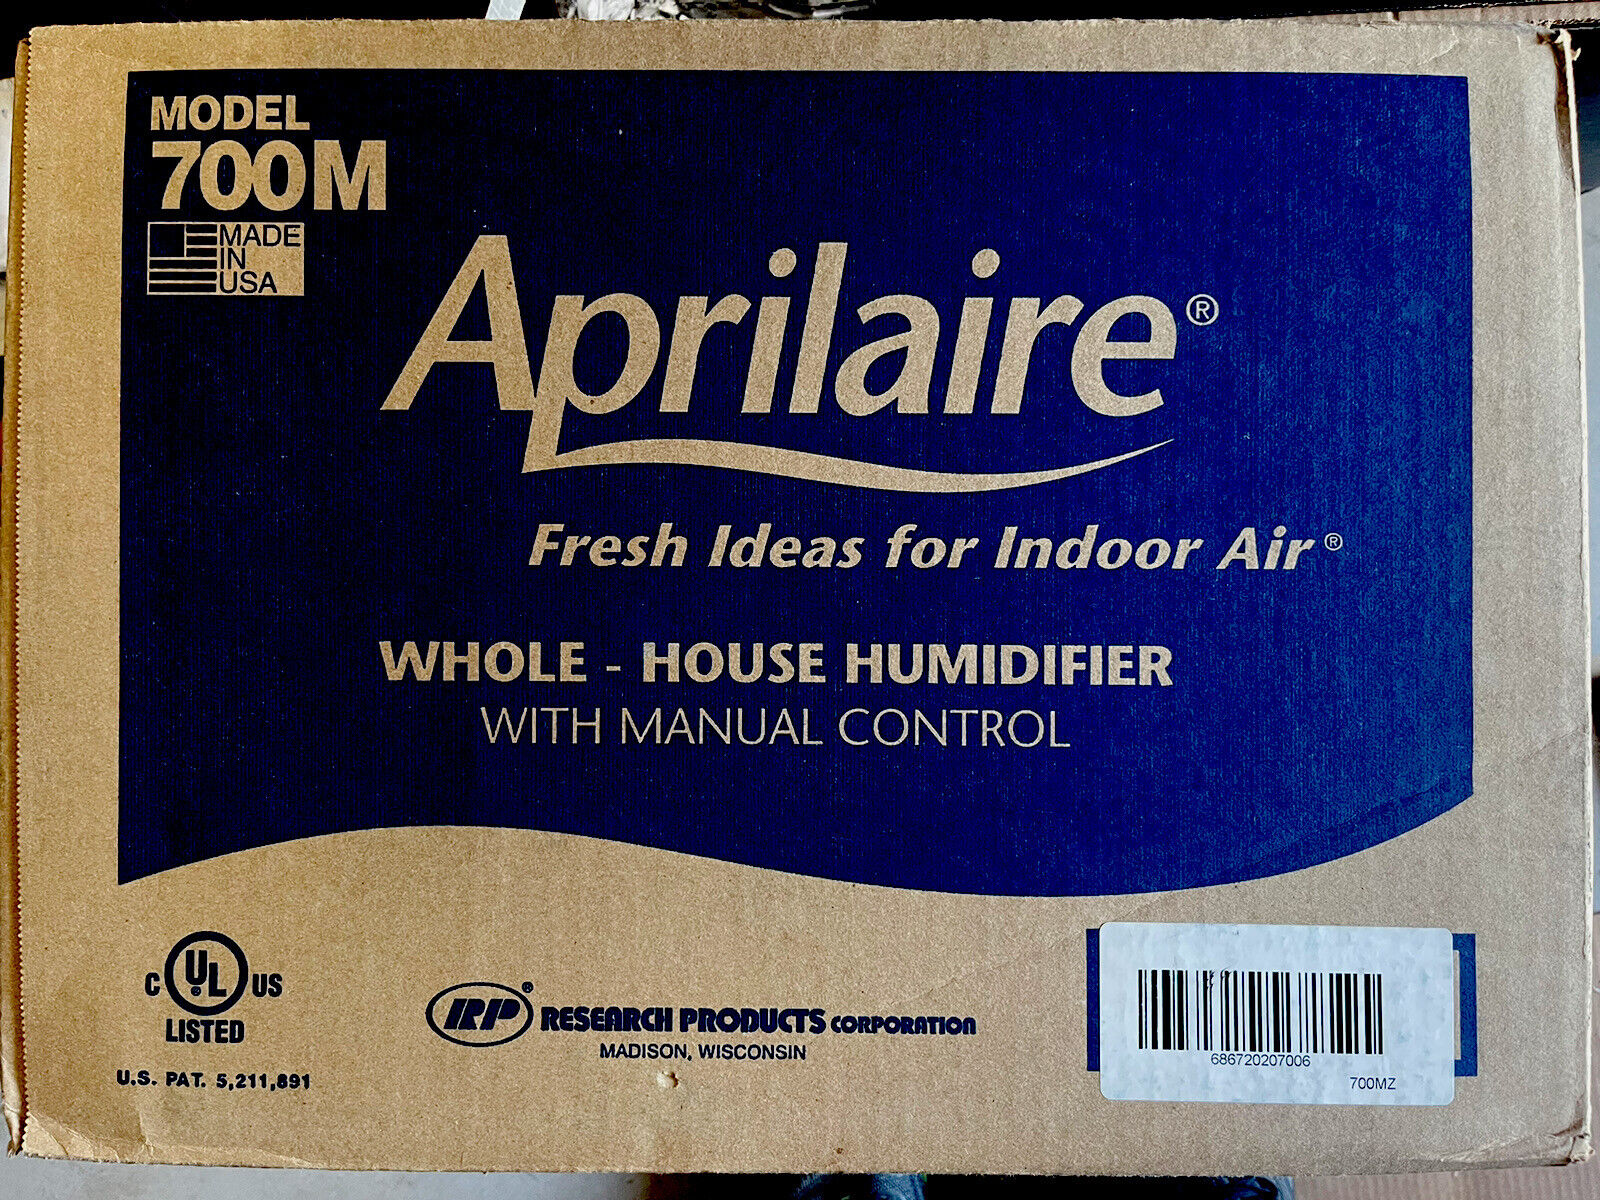 Aprilaire 700M Whole House Humidifier